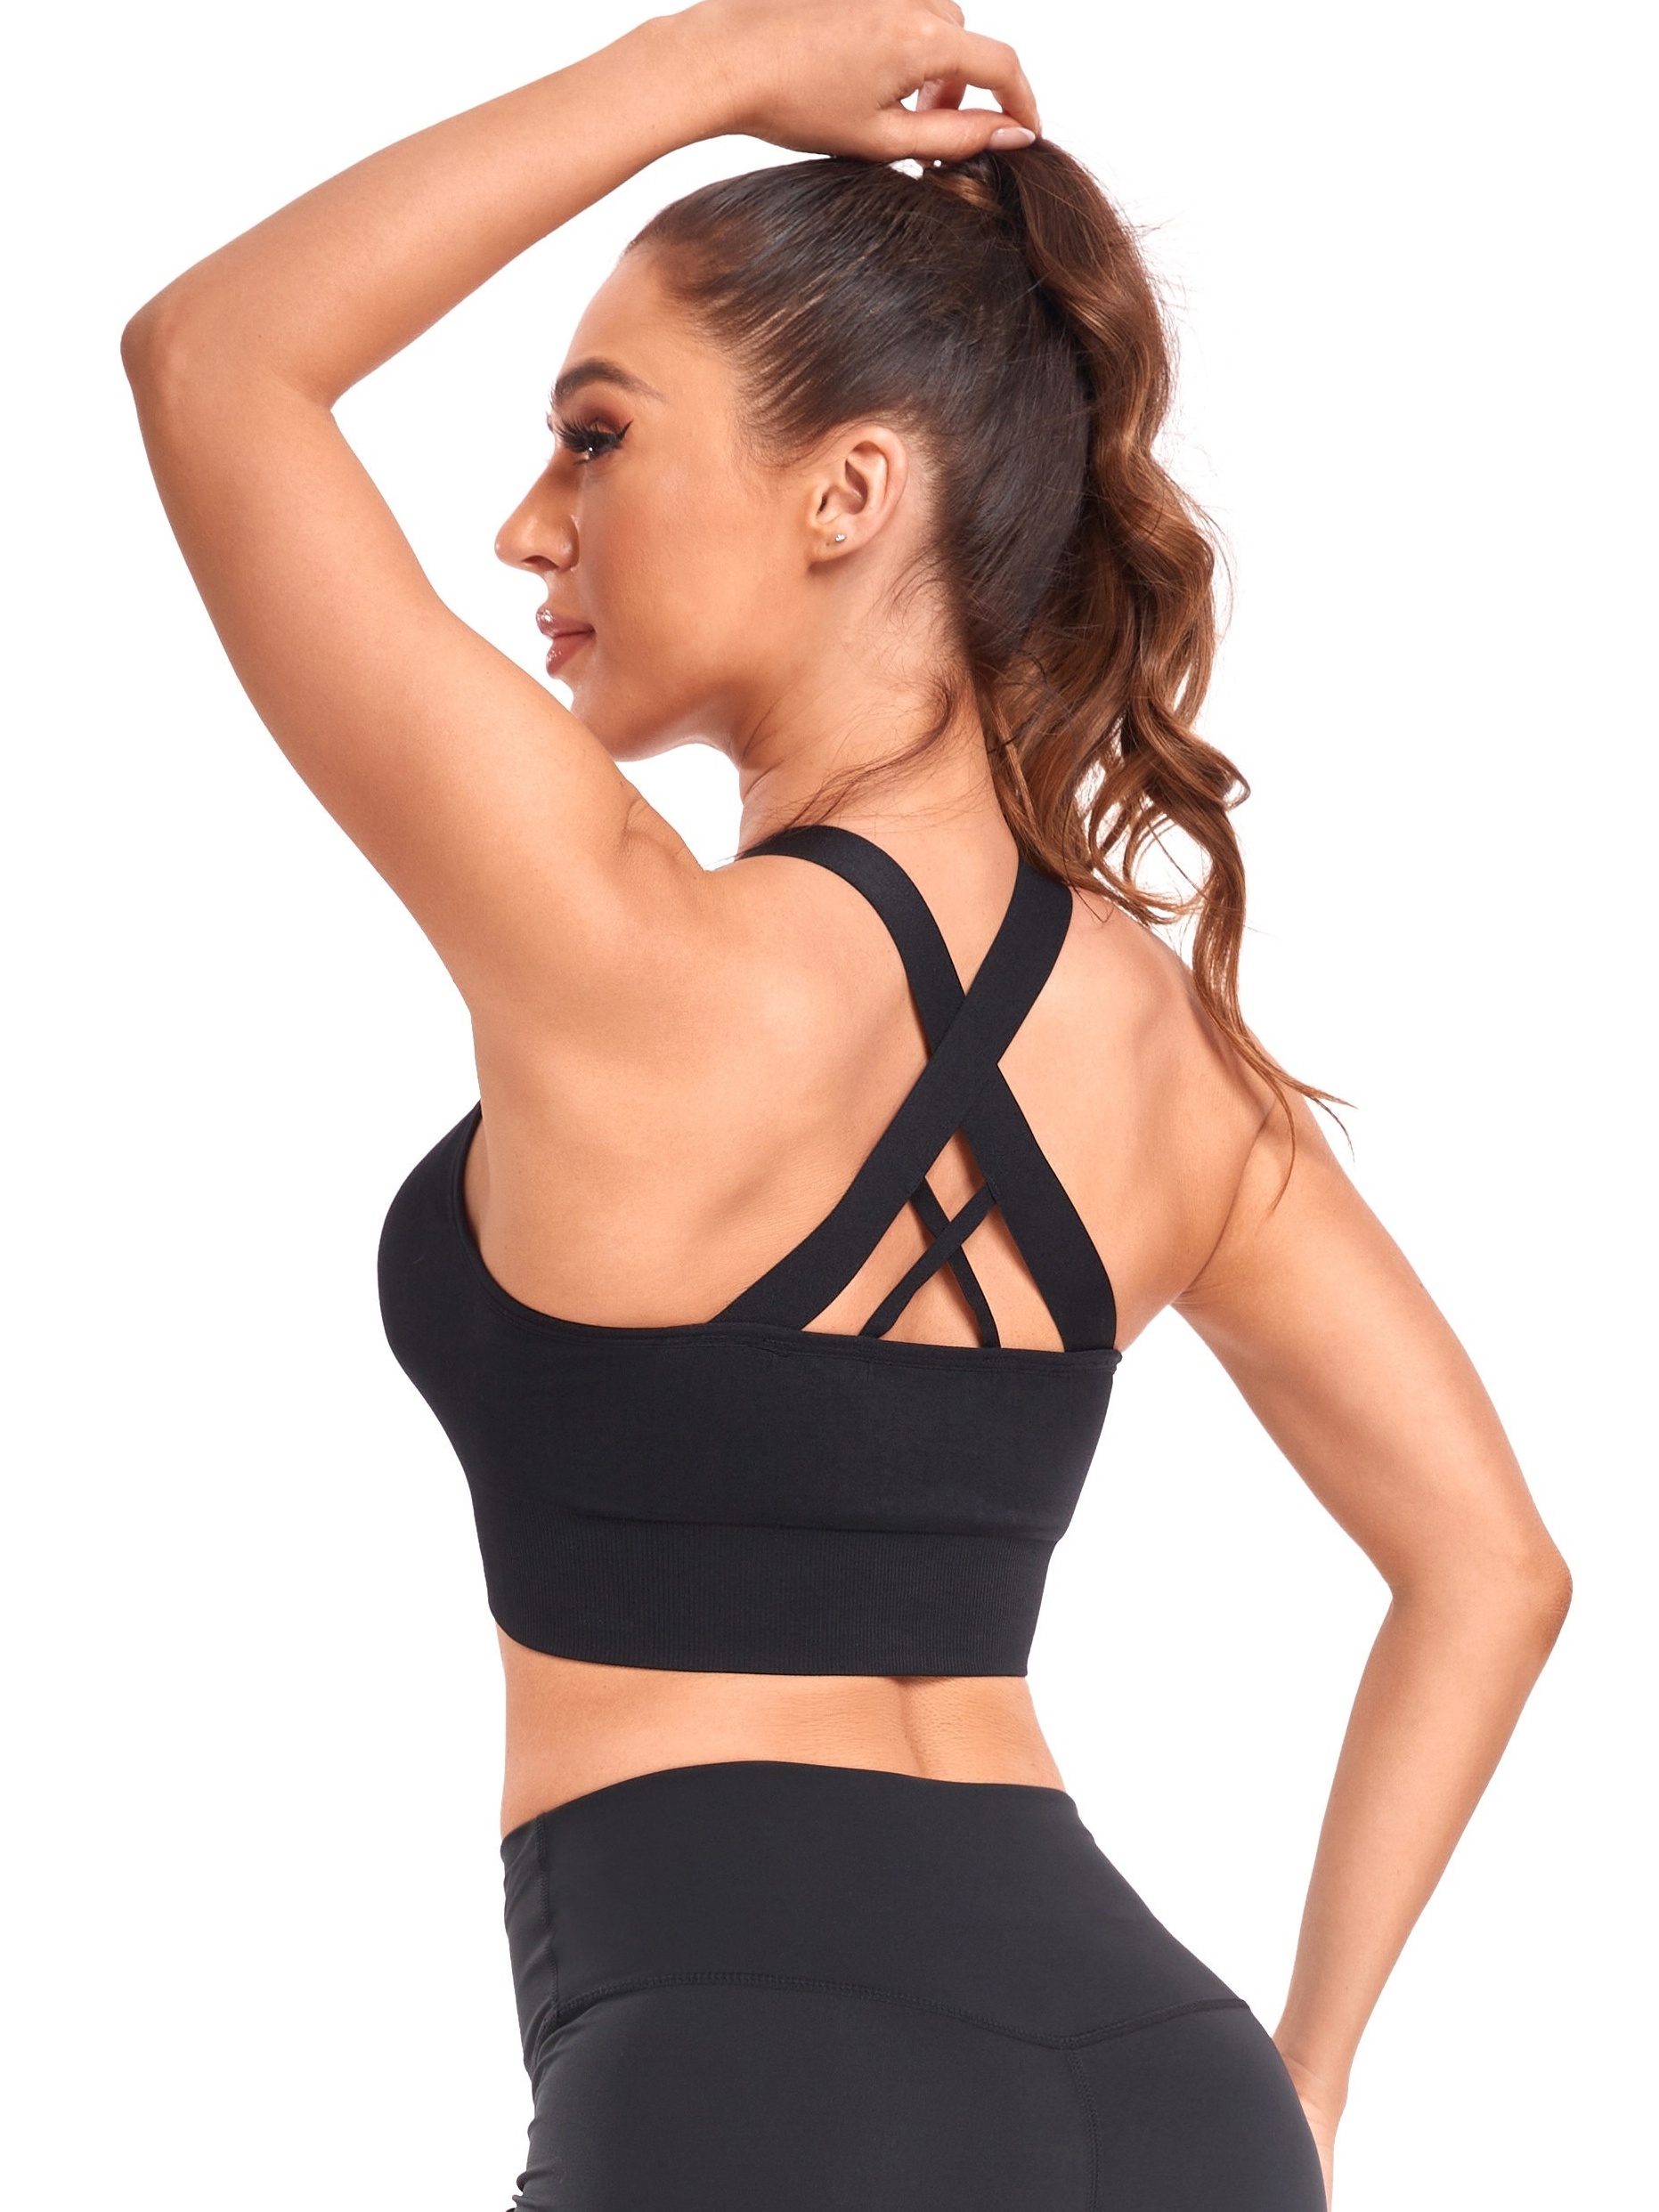  TTWWYY GUTA Shockproof Sports Bra Top Fitness Gym Women Bra  Back Cross Sports Bh Push Up Yoga Bust Padded Athletic Top Active Clothes  (Color: BLACK, Size: M) : Clothing, Shoes 